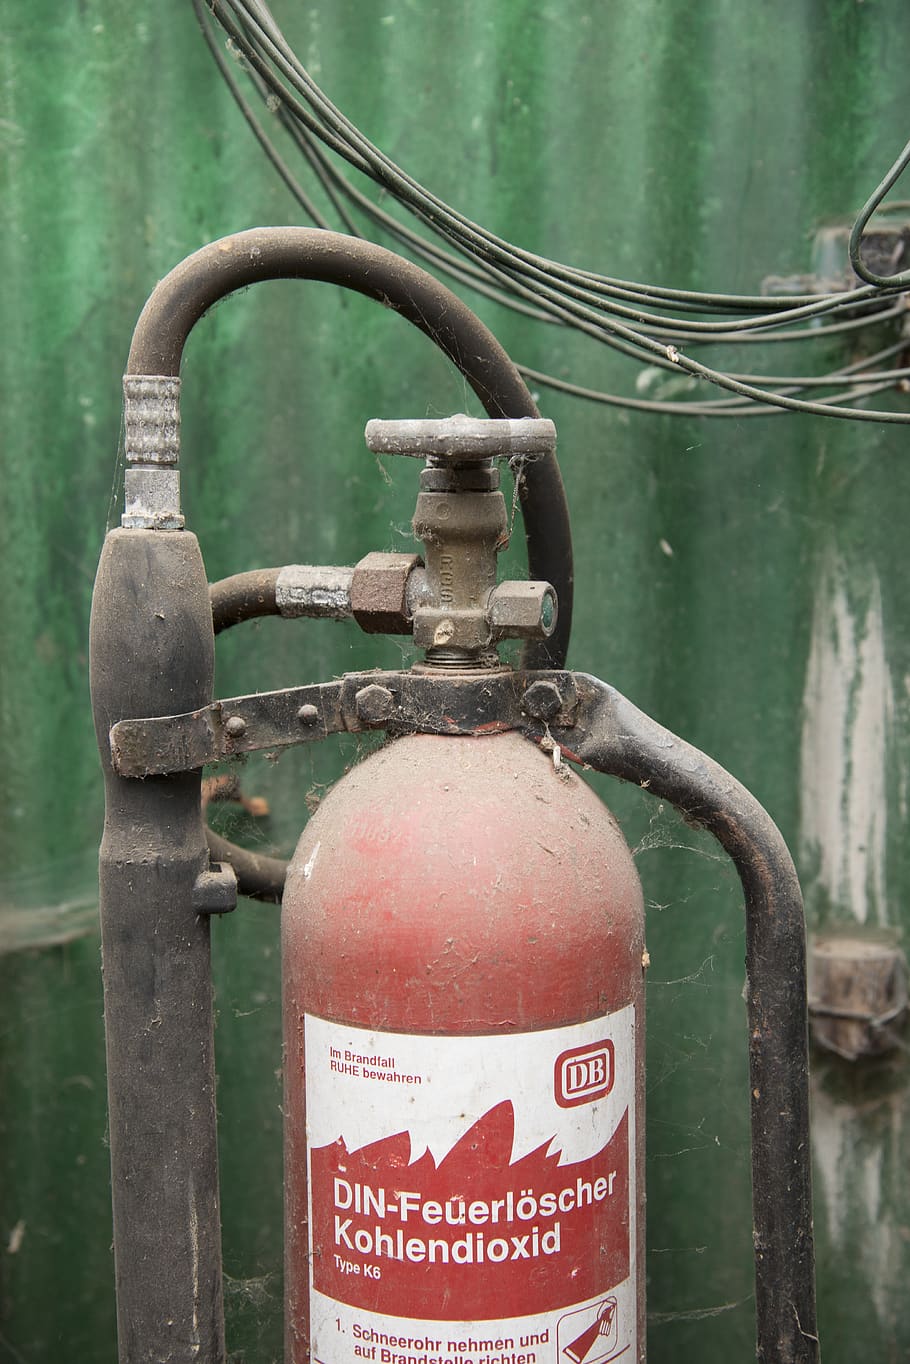 fire extinguisher, red, old, rusted, rust, spider webs, db, metal, safety, security